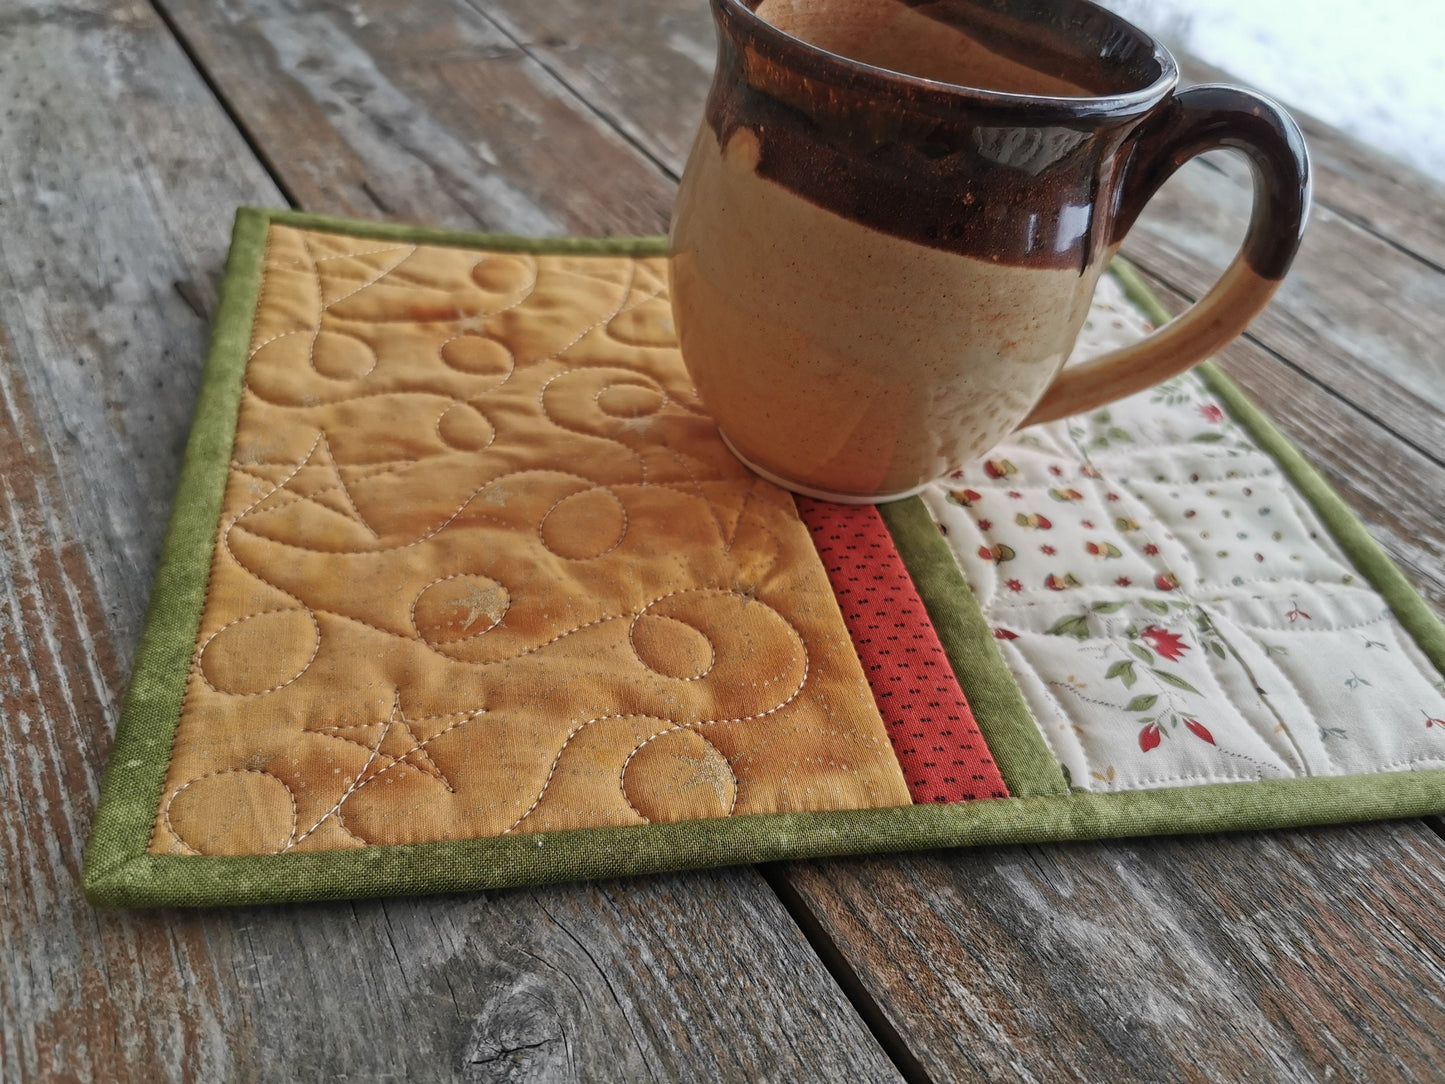 Quilted Christmas Mug Rug | Candle Mat | Mini Quilt | Small Gift